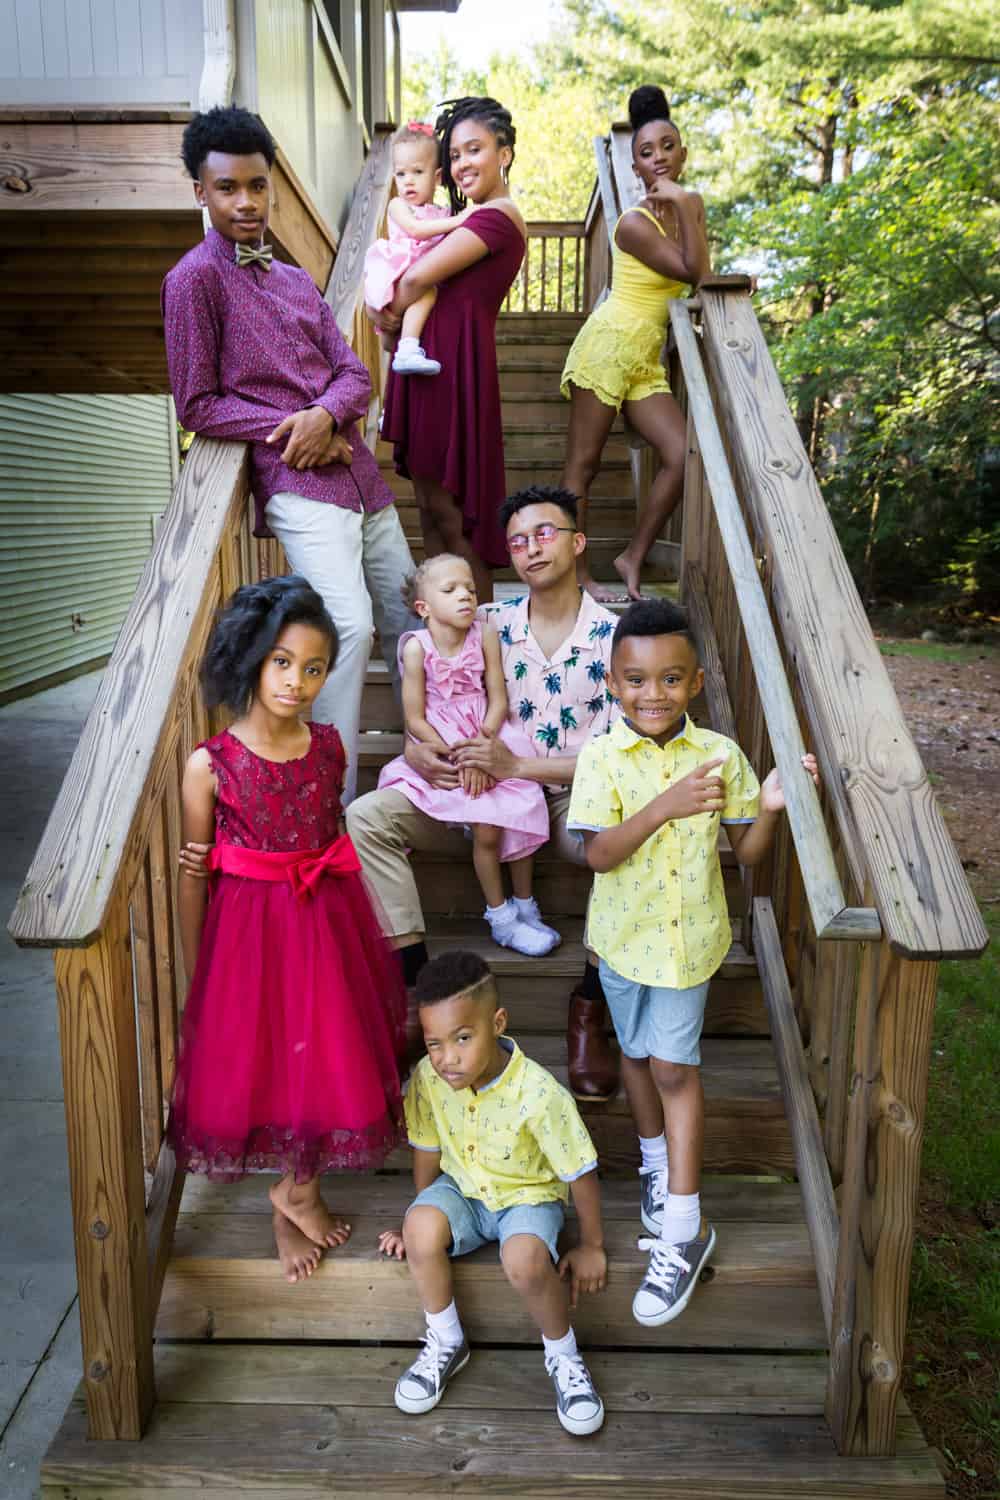 Kids posed on staircase during a family reunion portrait